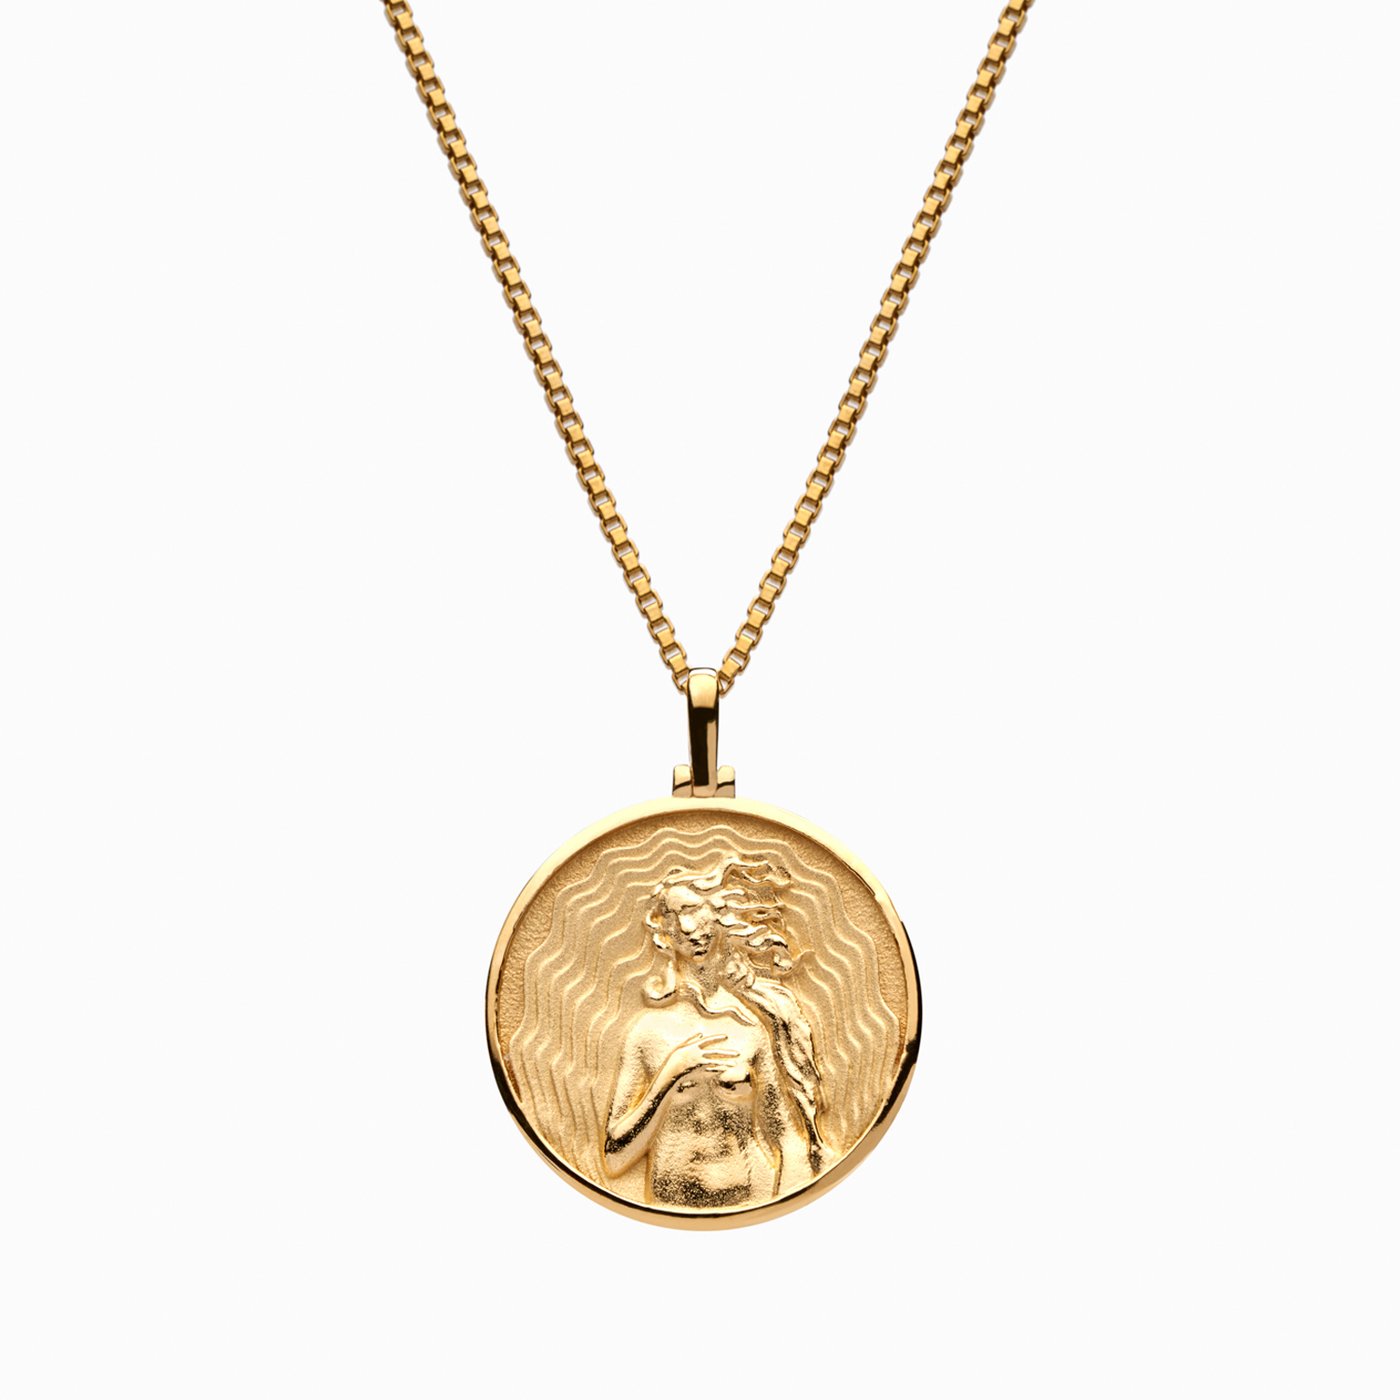 coin pendant necklace greek goddess necklace